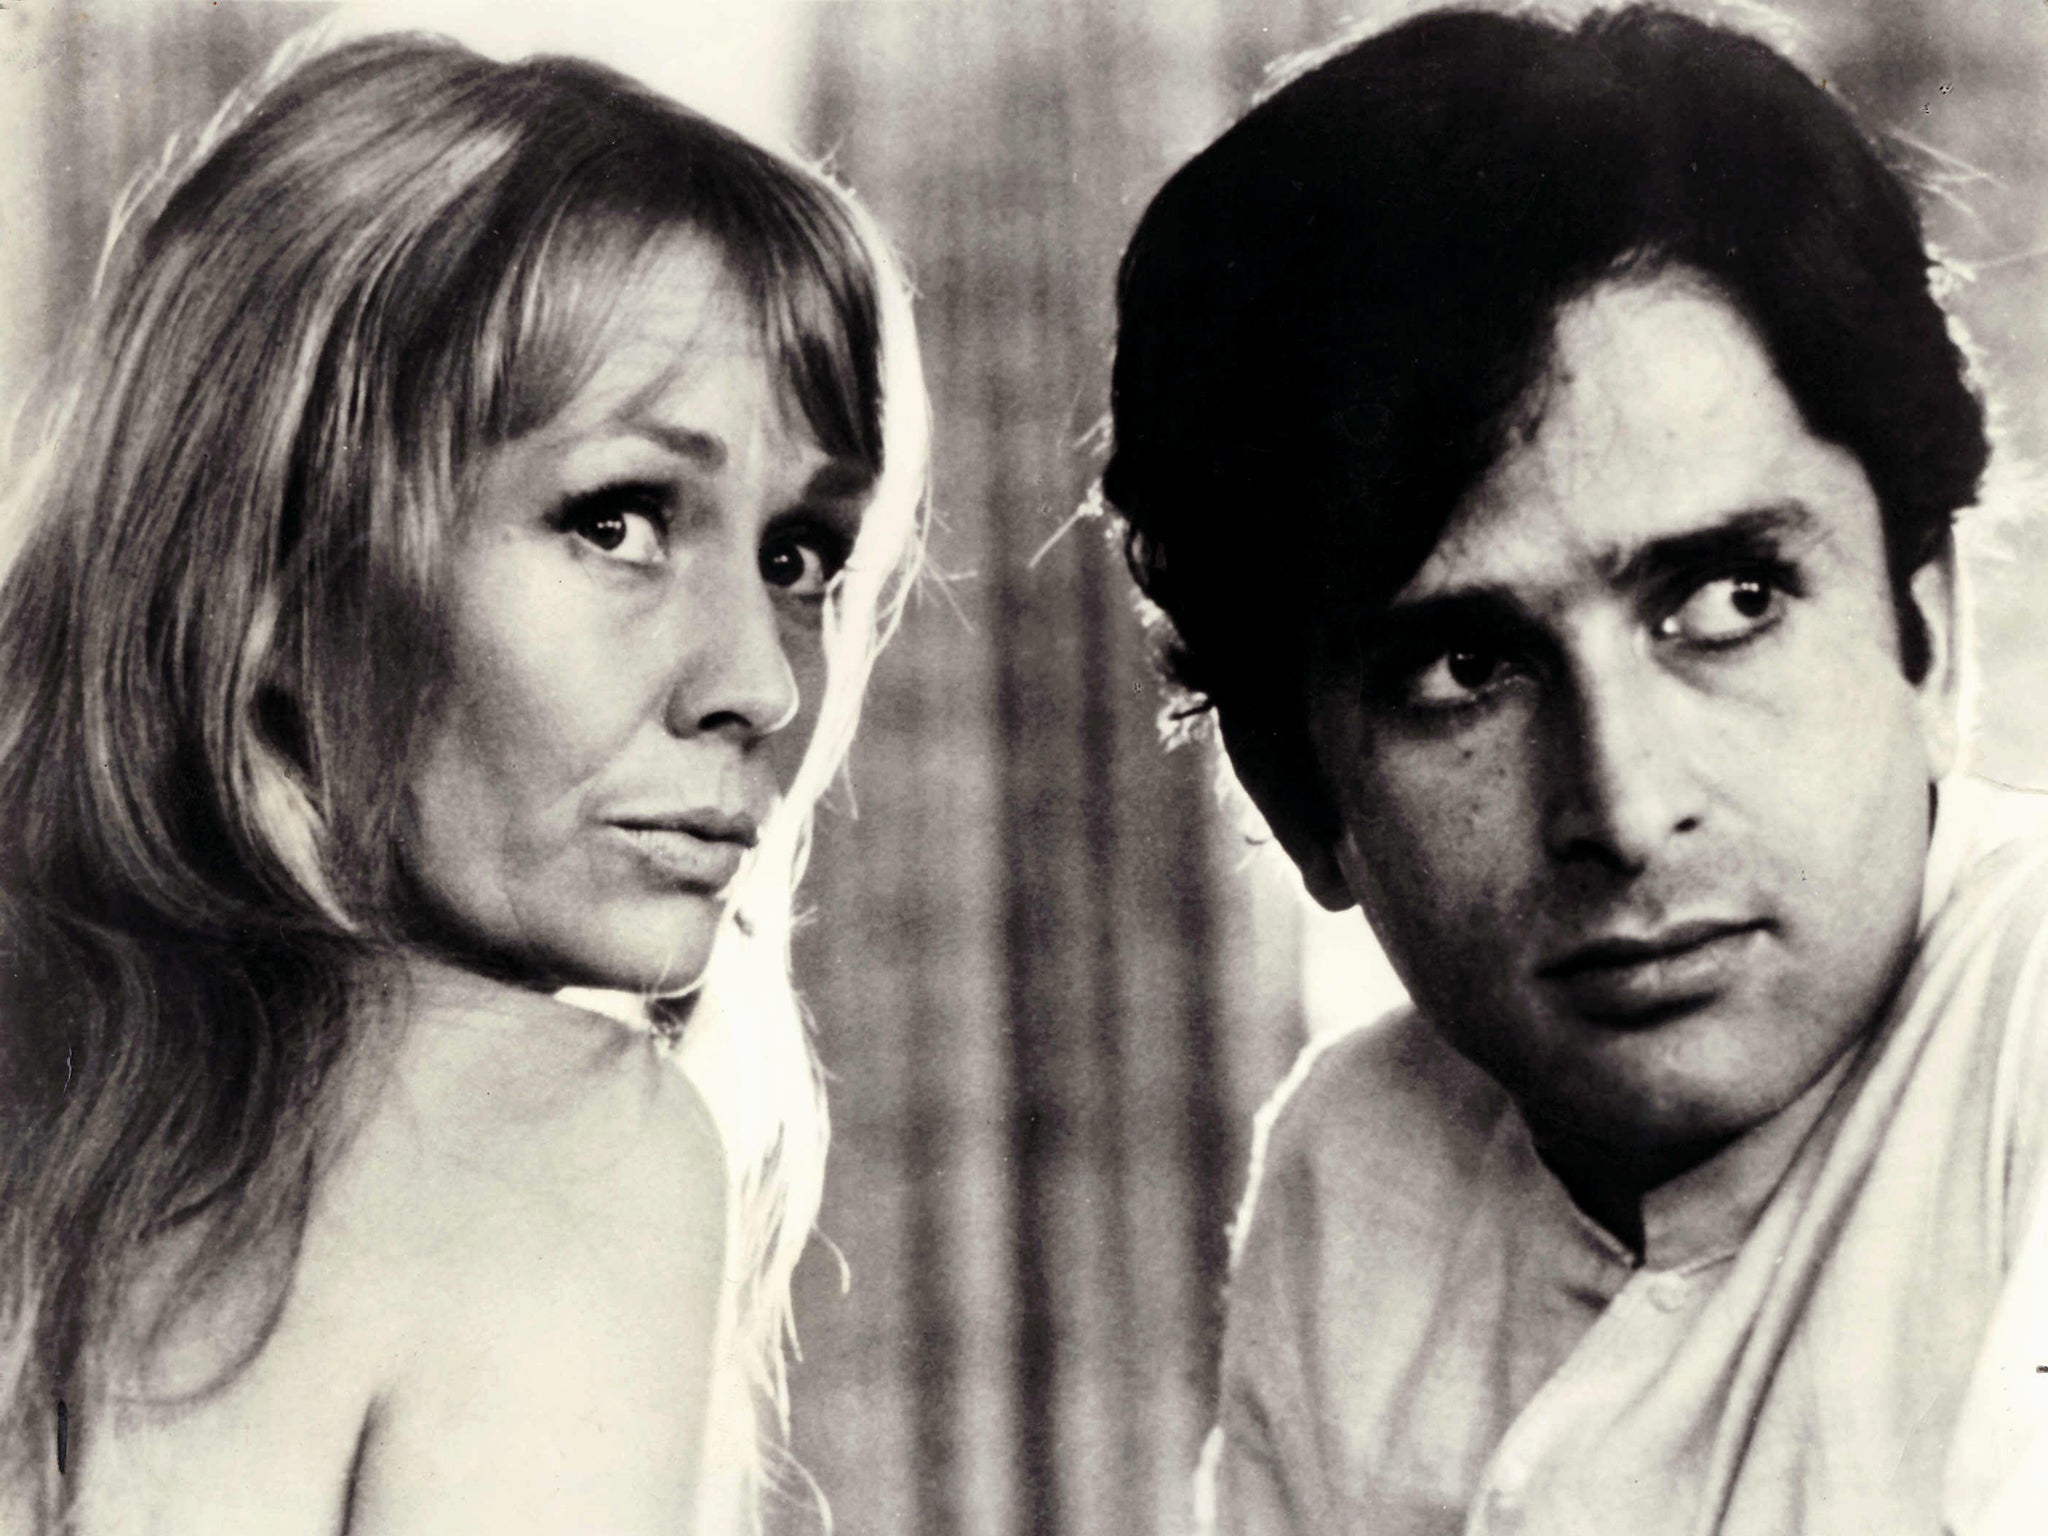 Kapoor with his wife Jennifer Kendal in the 1970 film ‘Bombay Talkie’. The couple went on to build the Prithvi Theatre in Mumbai